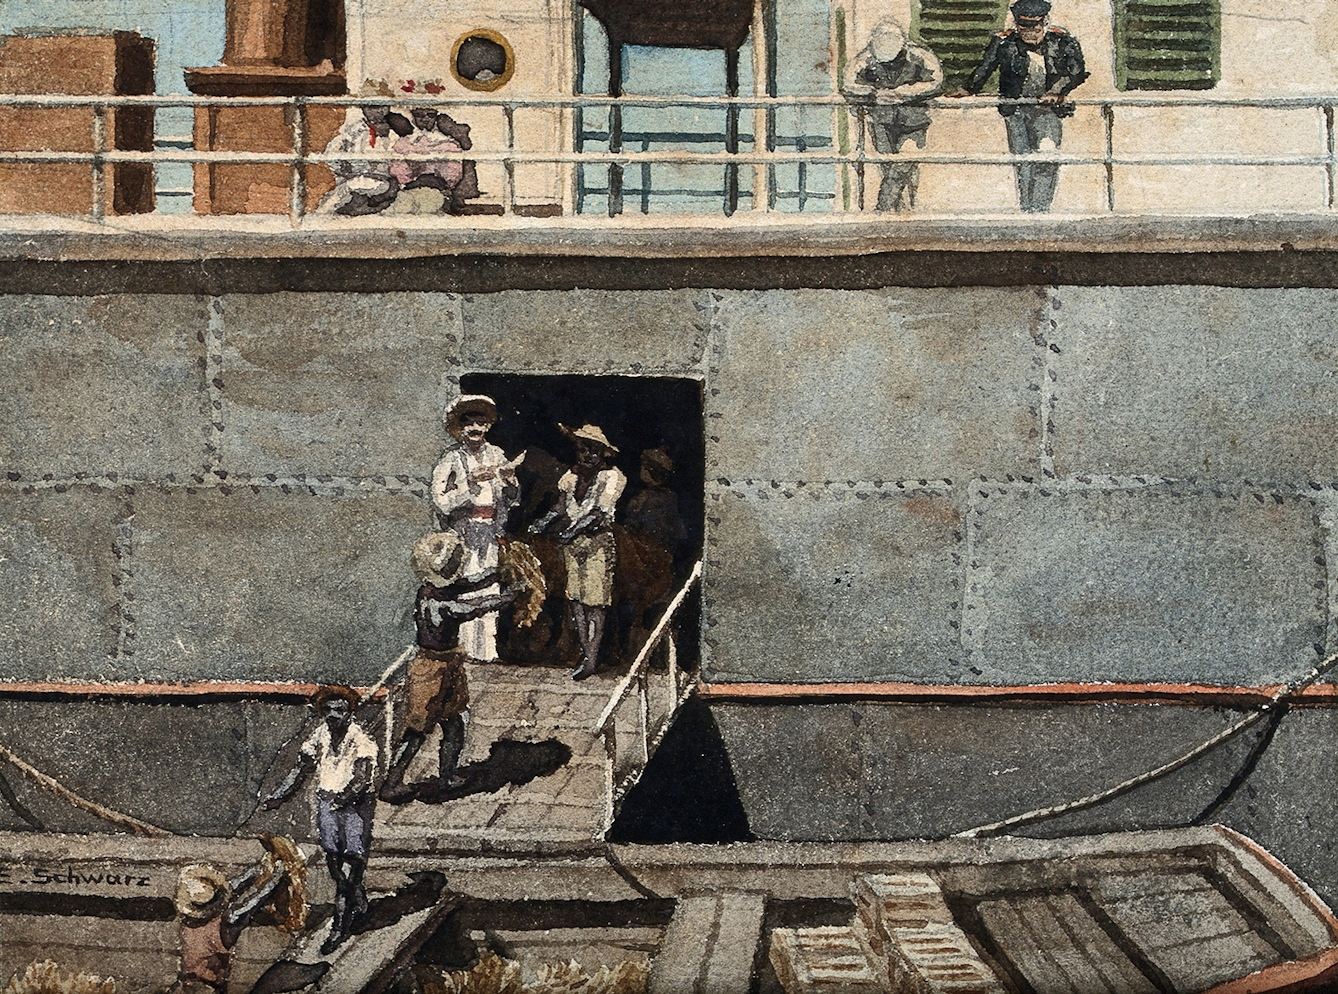 Men loading bananas into the hold of a ship in the West Indies